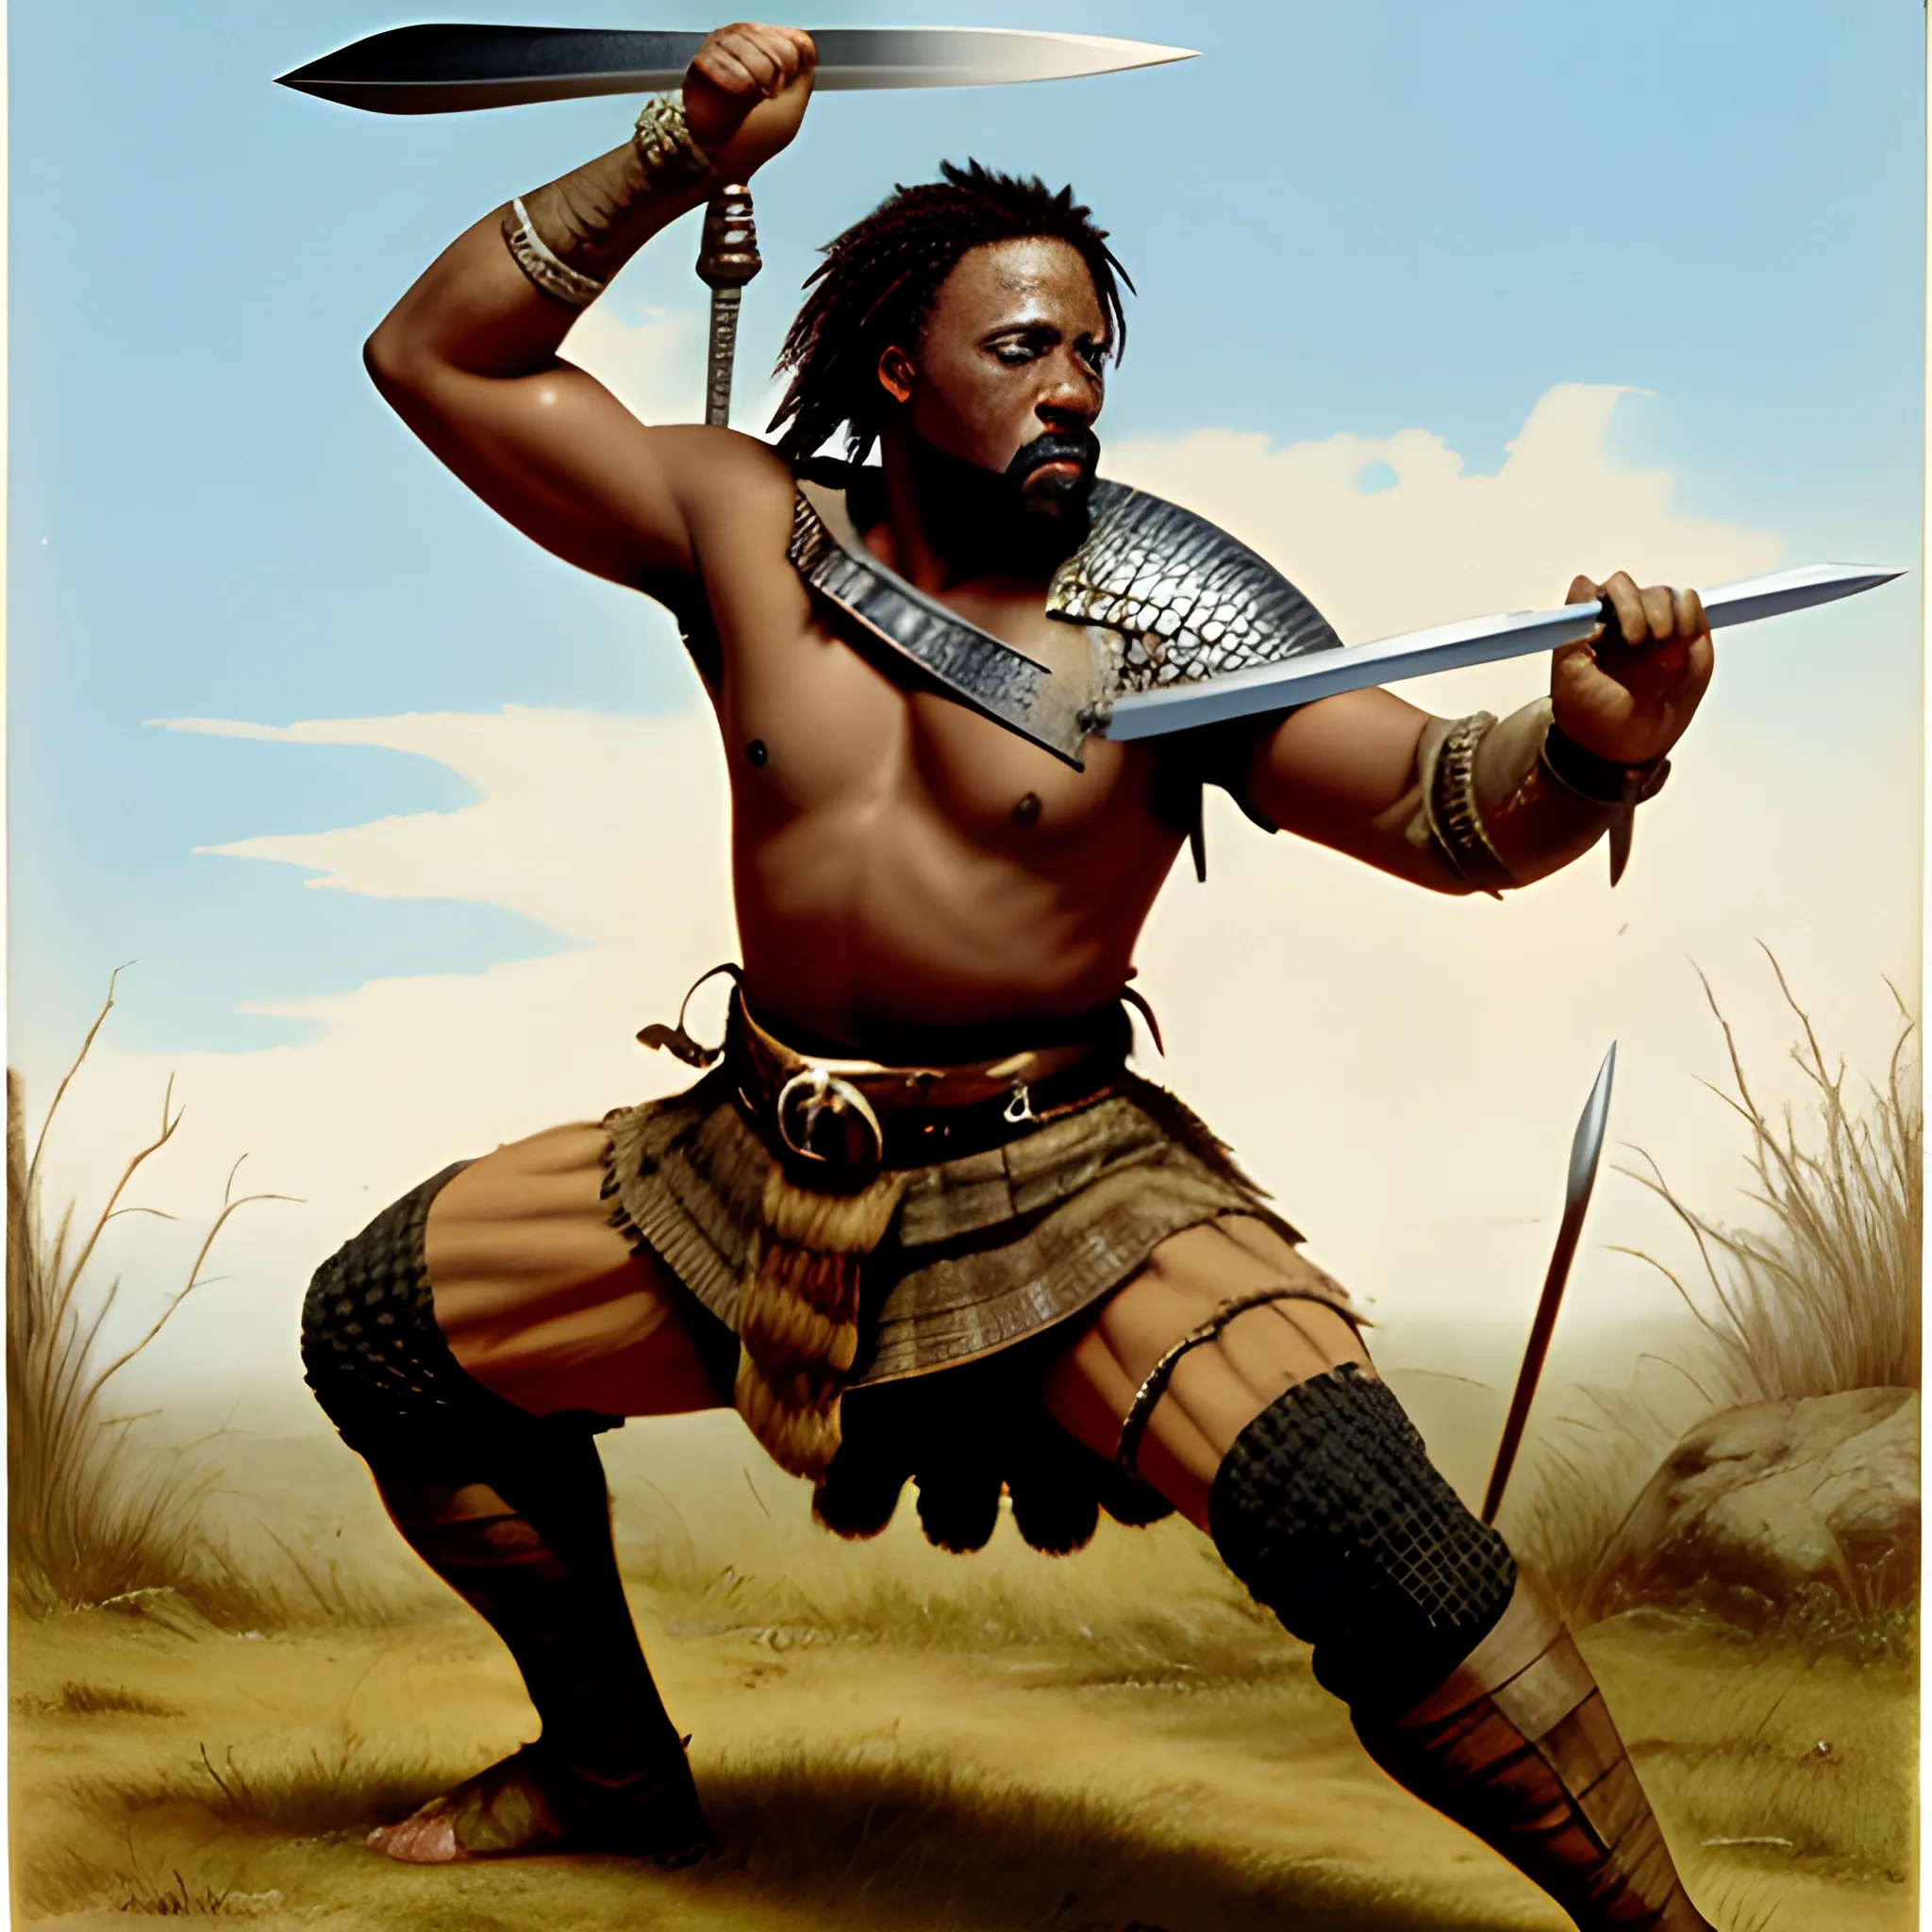 an African American imagined as William wallace from Braveheart holding a sword above his head in a fighting stance